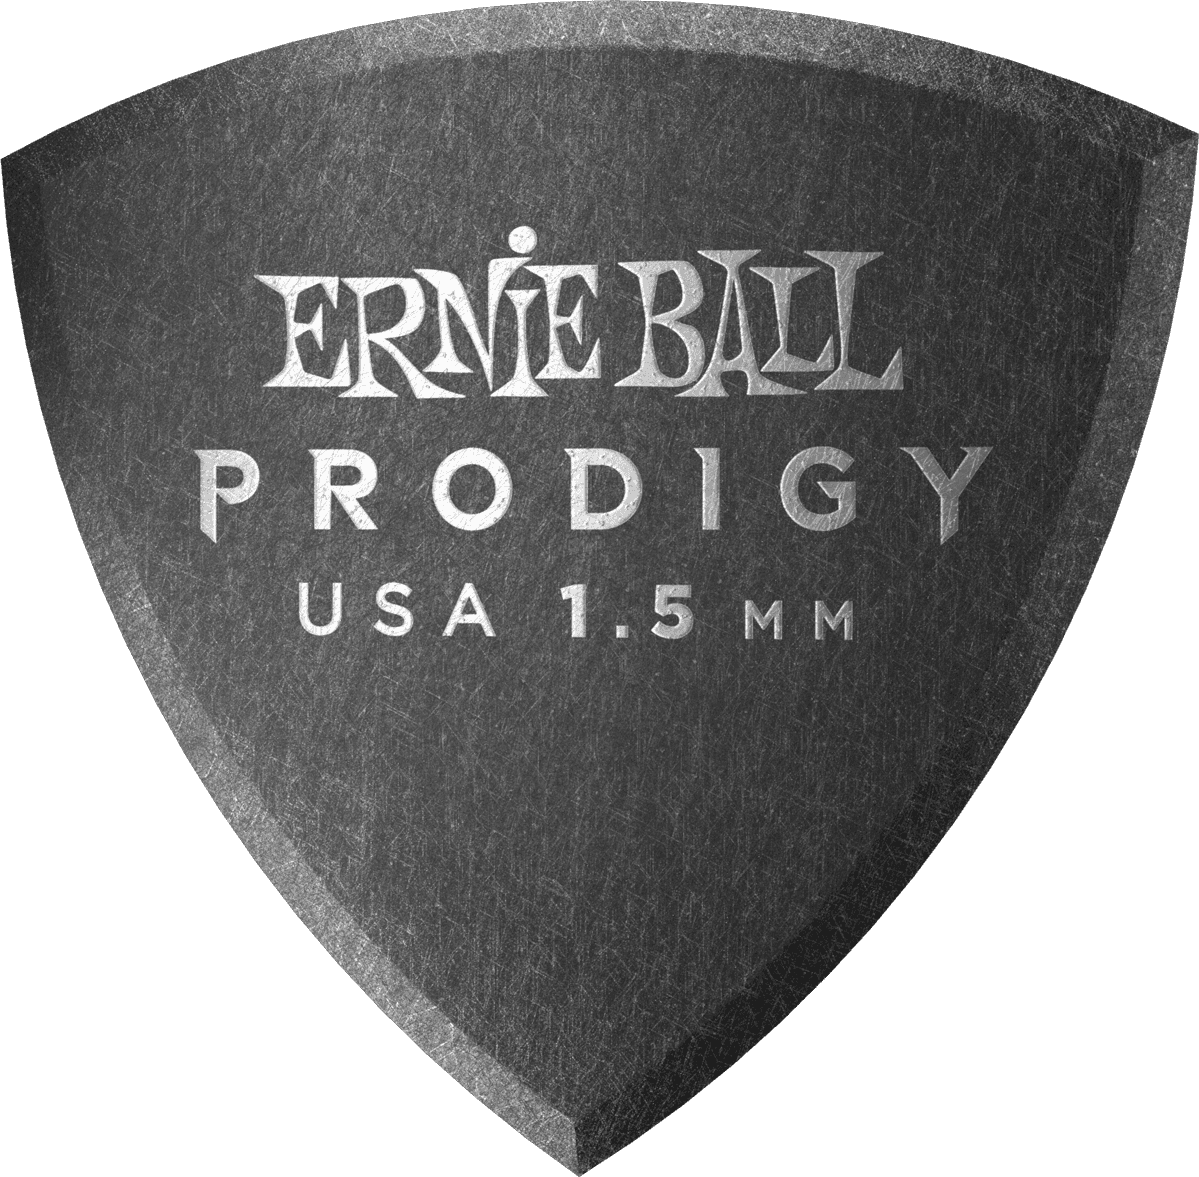 Ernie Ball Prodigy Shield 1,5mm (x6 Pack) - Guitar pick - Main picture